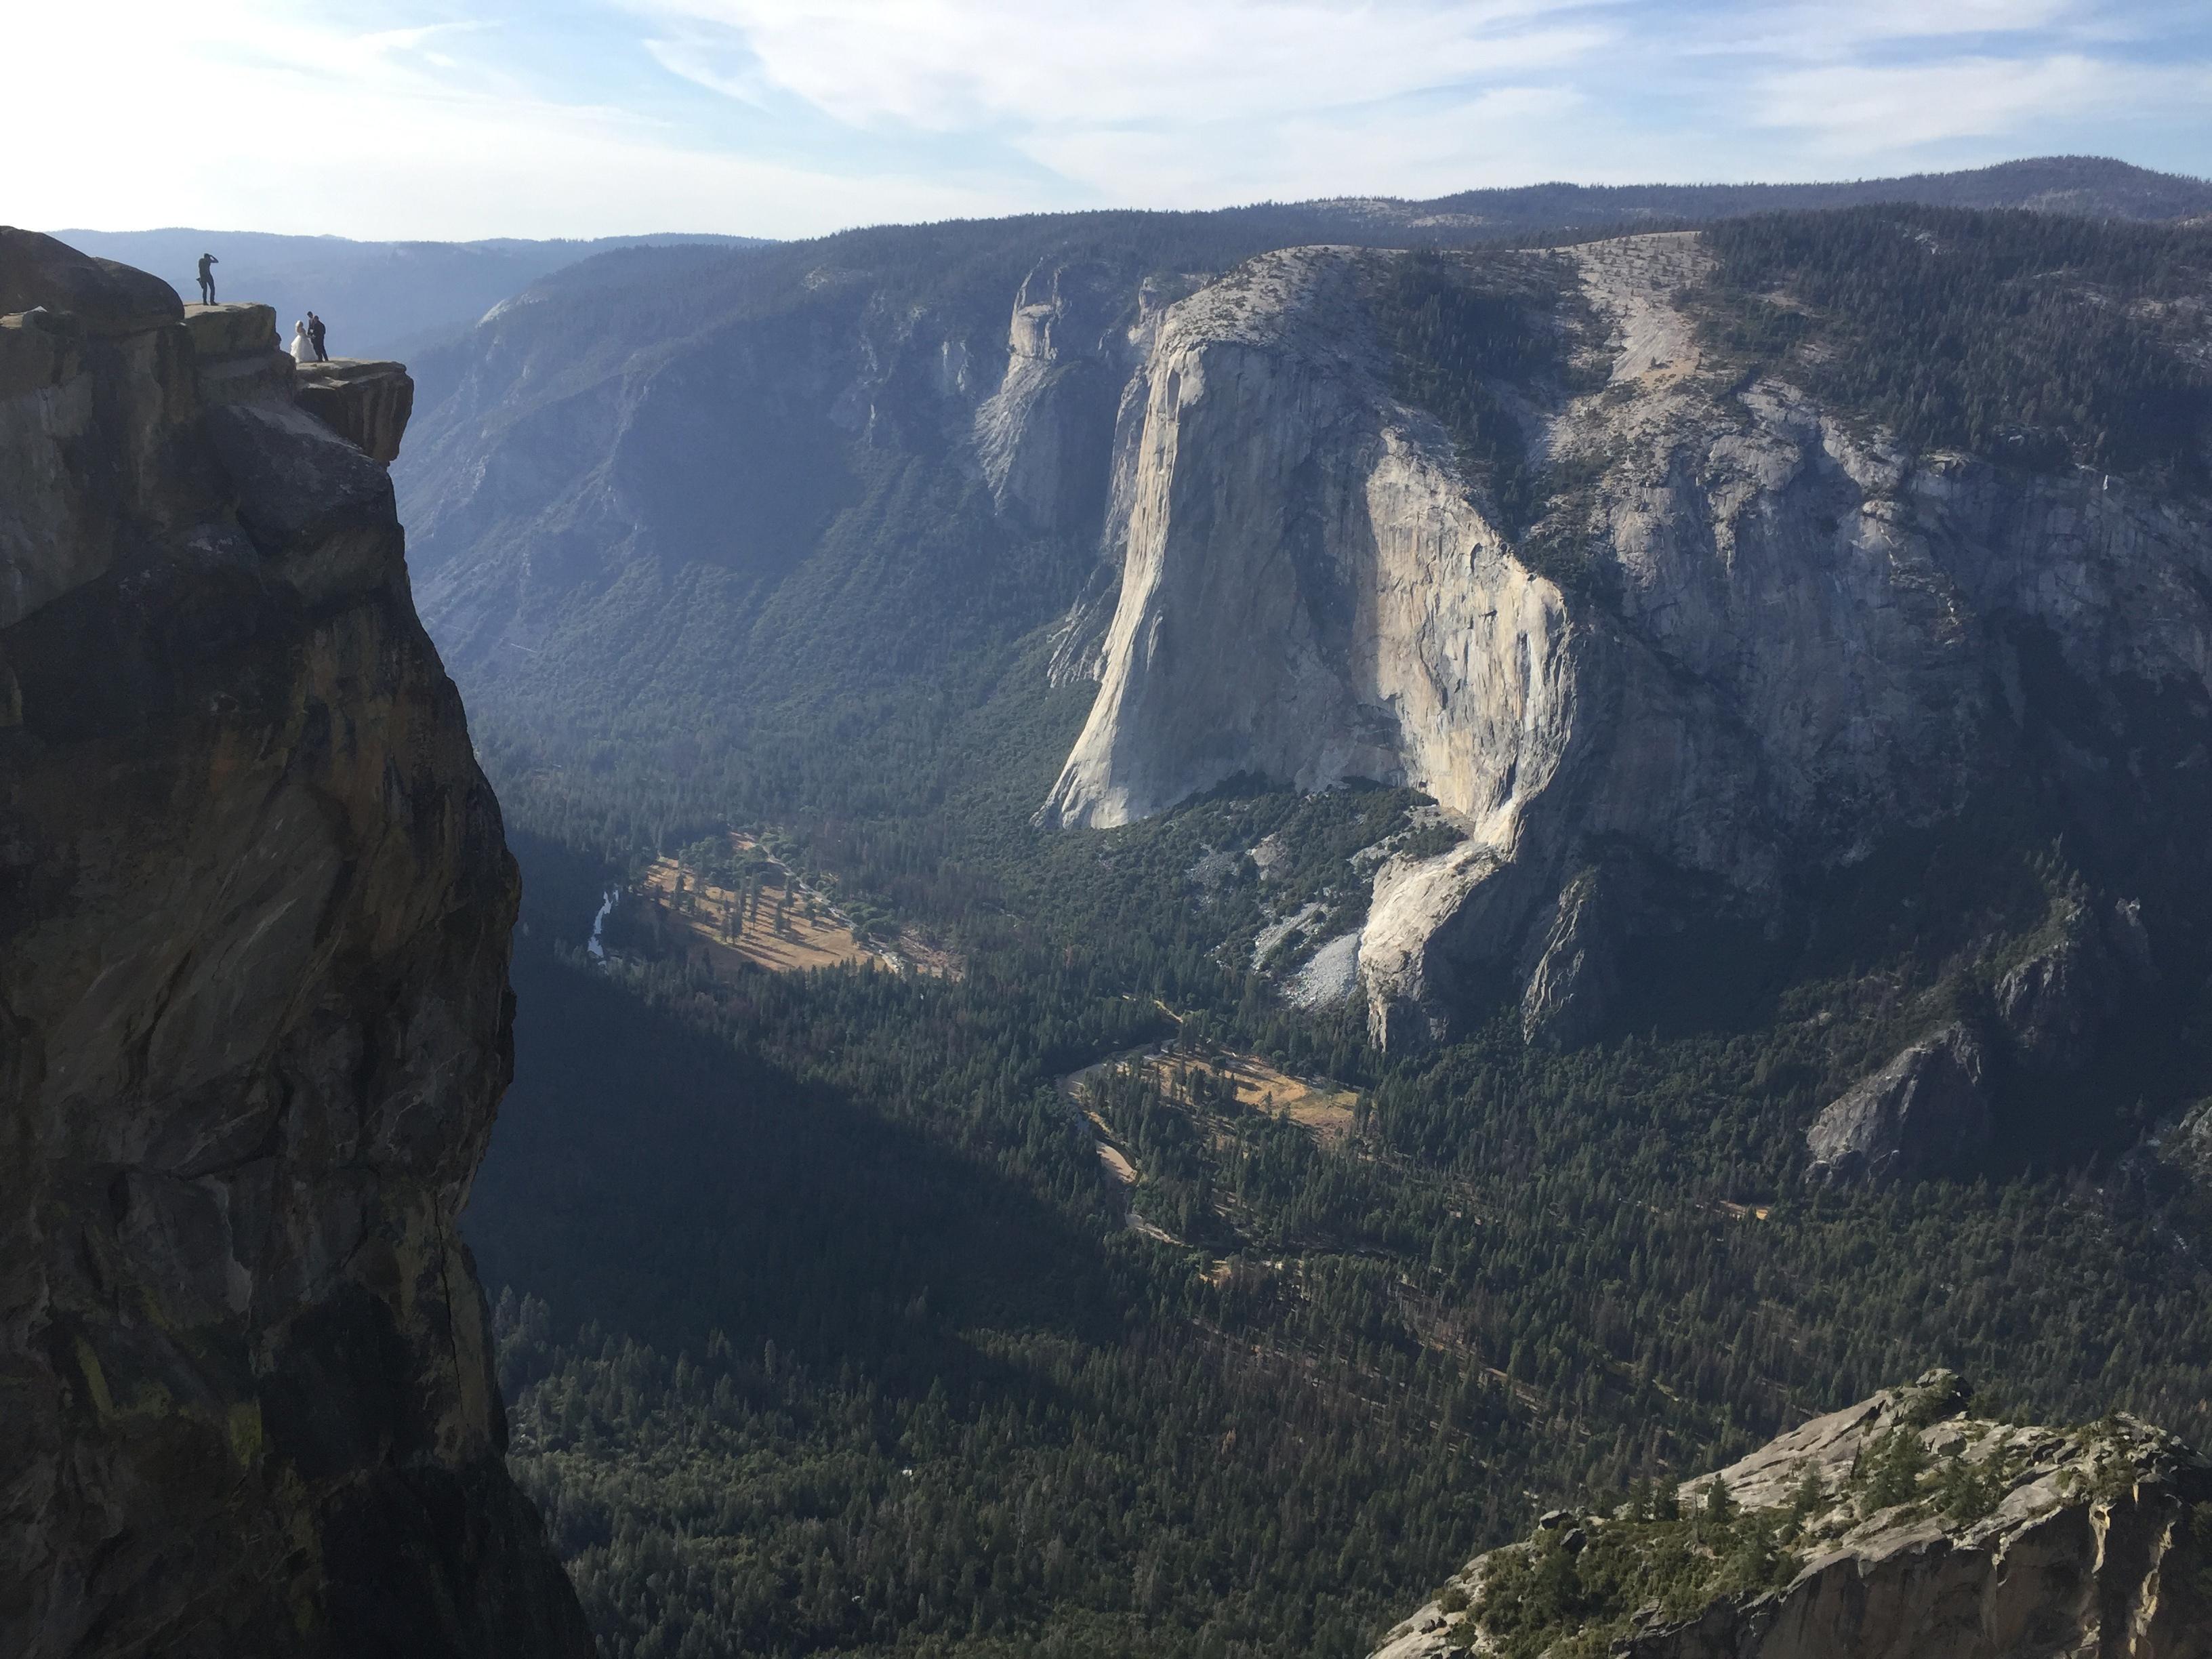 Yosemite rangers recover bodies of 2 who fell from overlook The